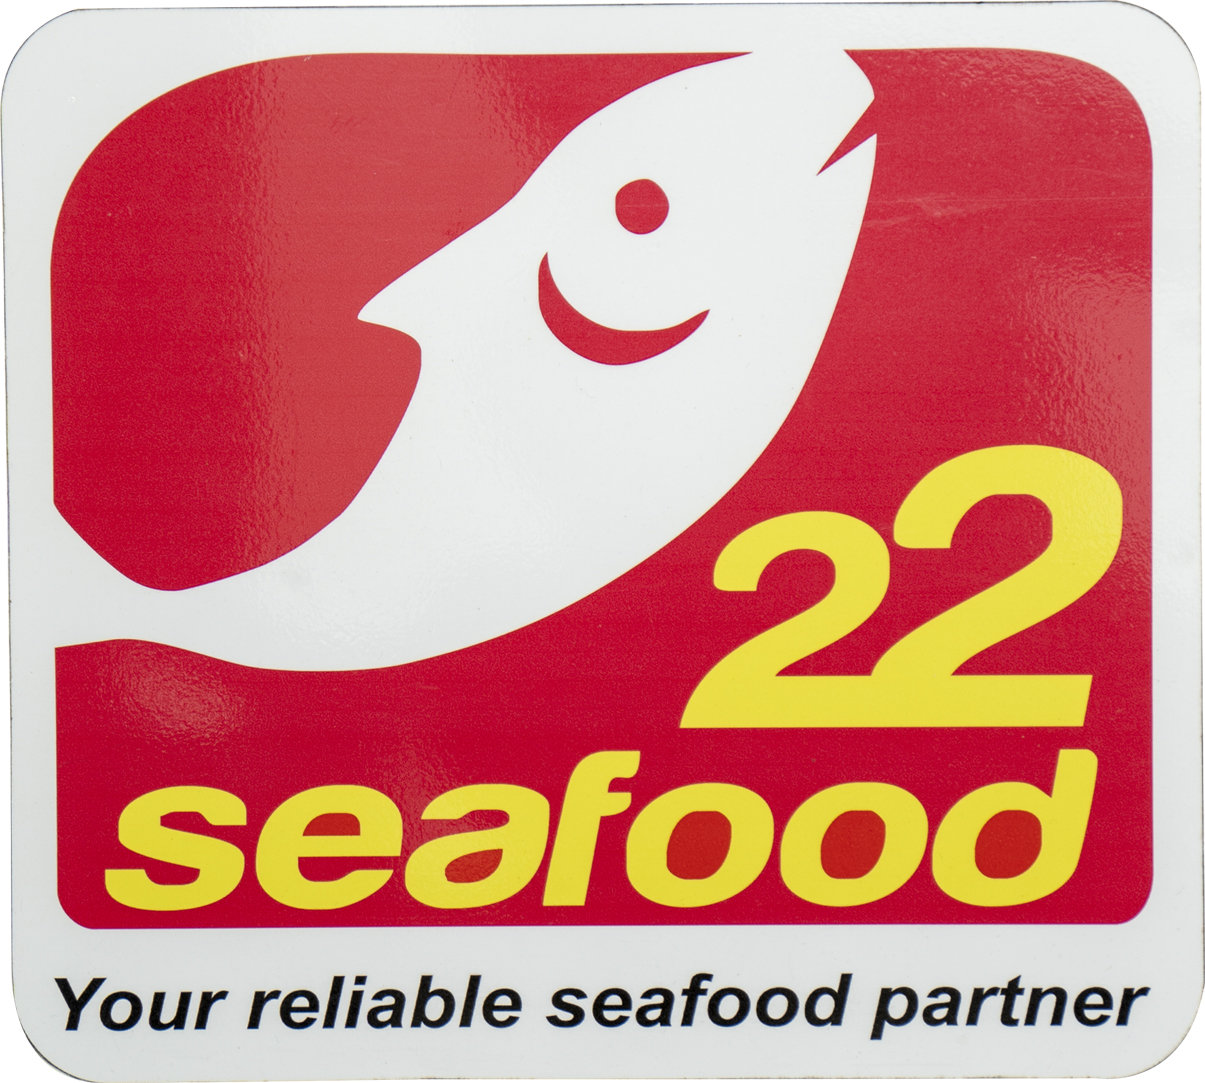 22 Seafood Official Store